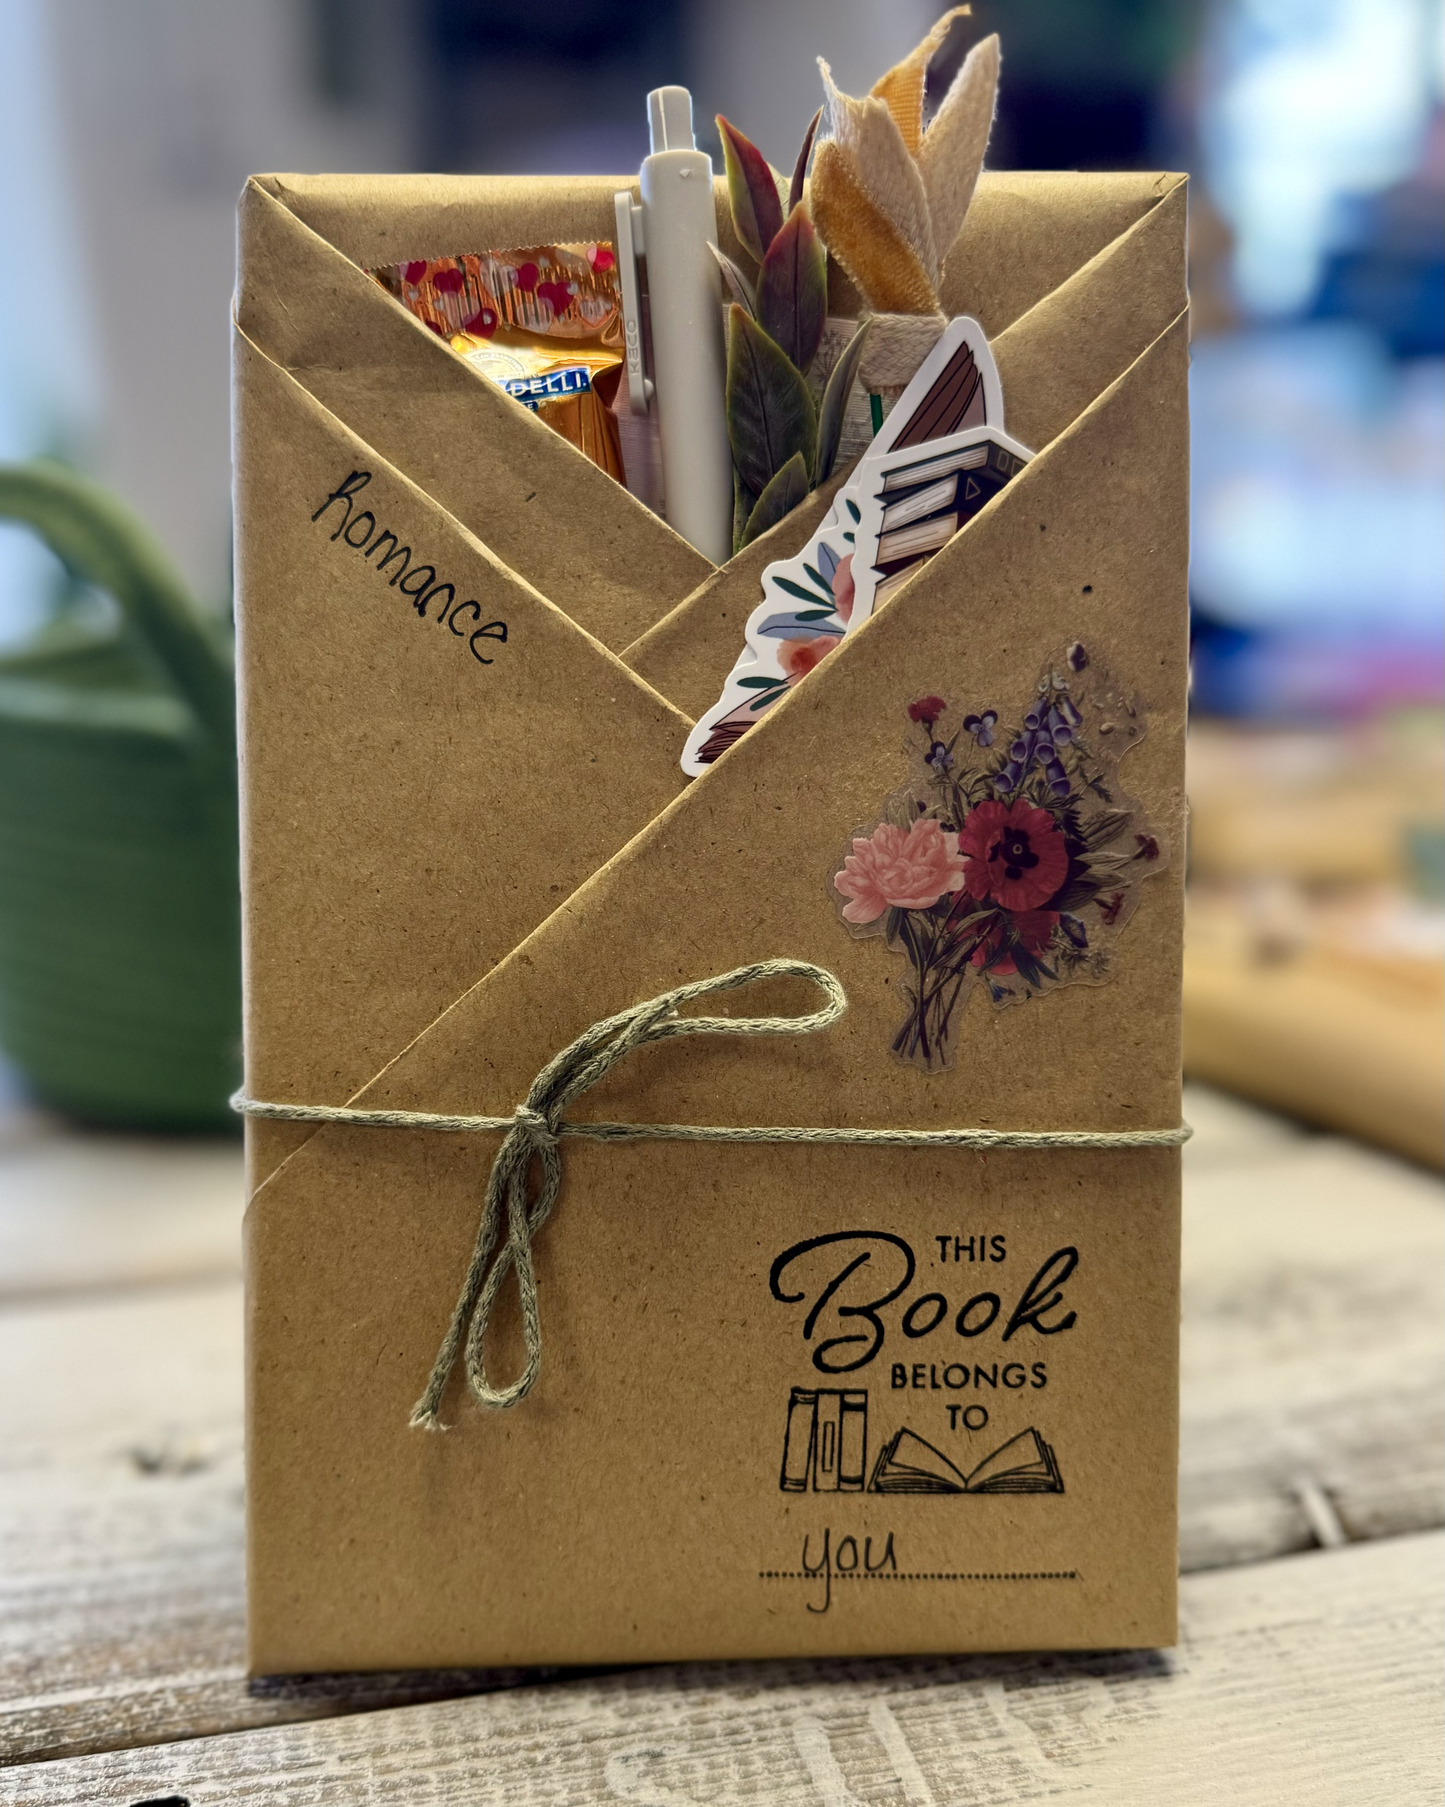 blind date with a book - bundle